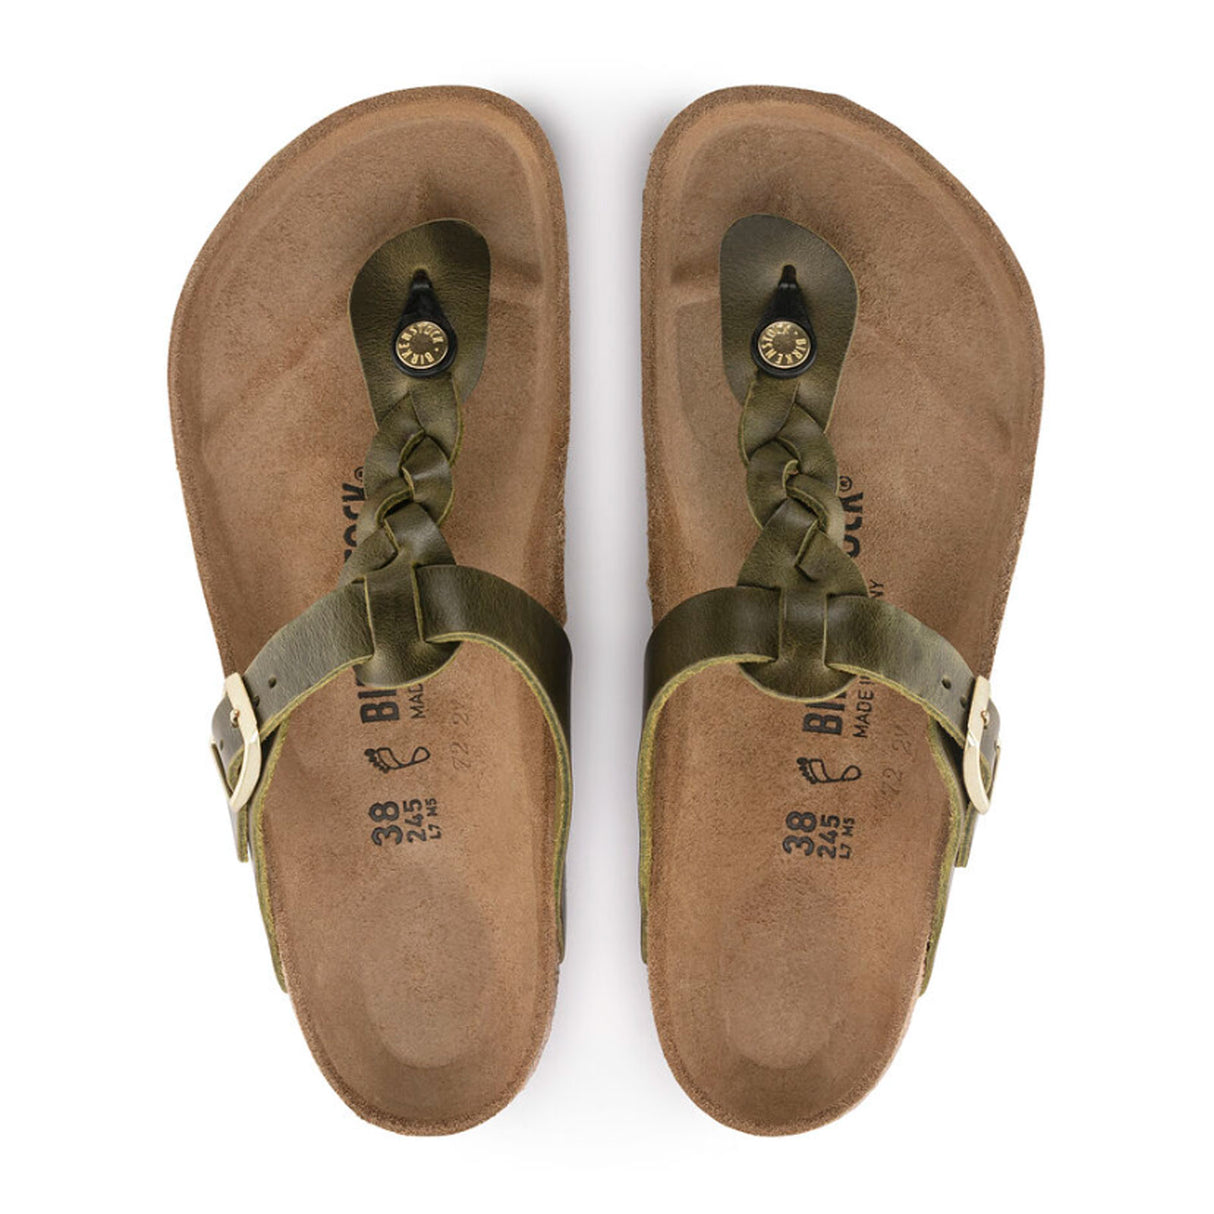 Birkenstock Gizeh Braided Thong Sandal (Women) - Olive Green Oiled Leather